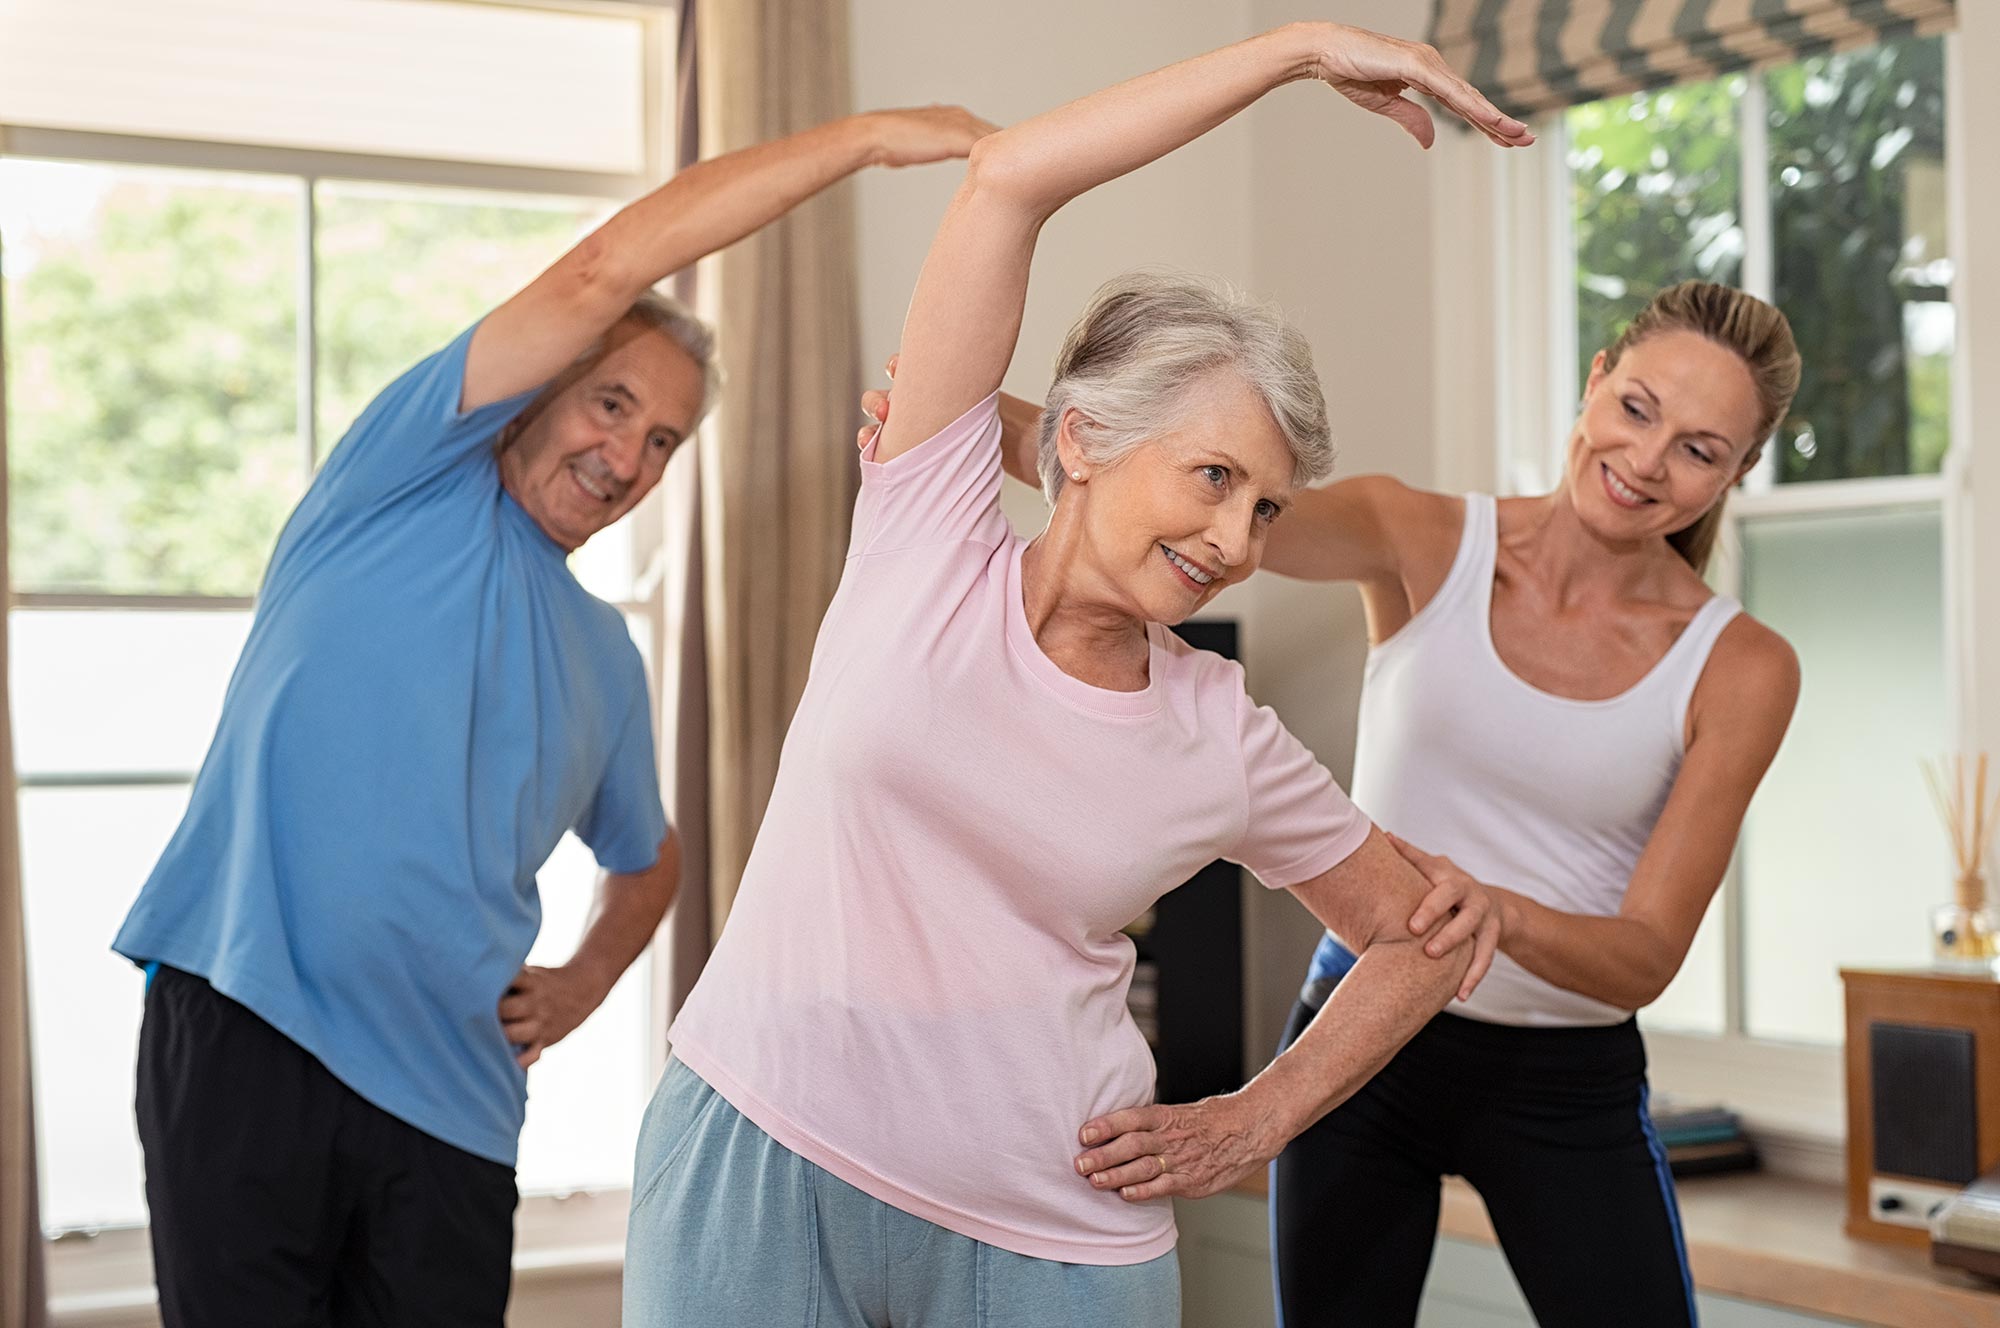 No Matter How Old You Are, Regular Exercise Is Good for Your Heart